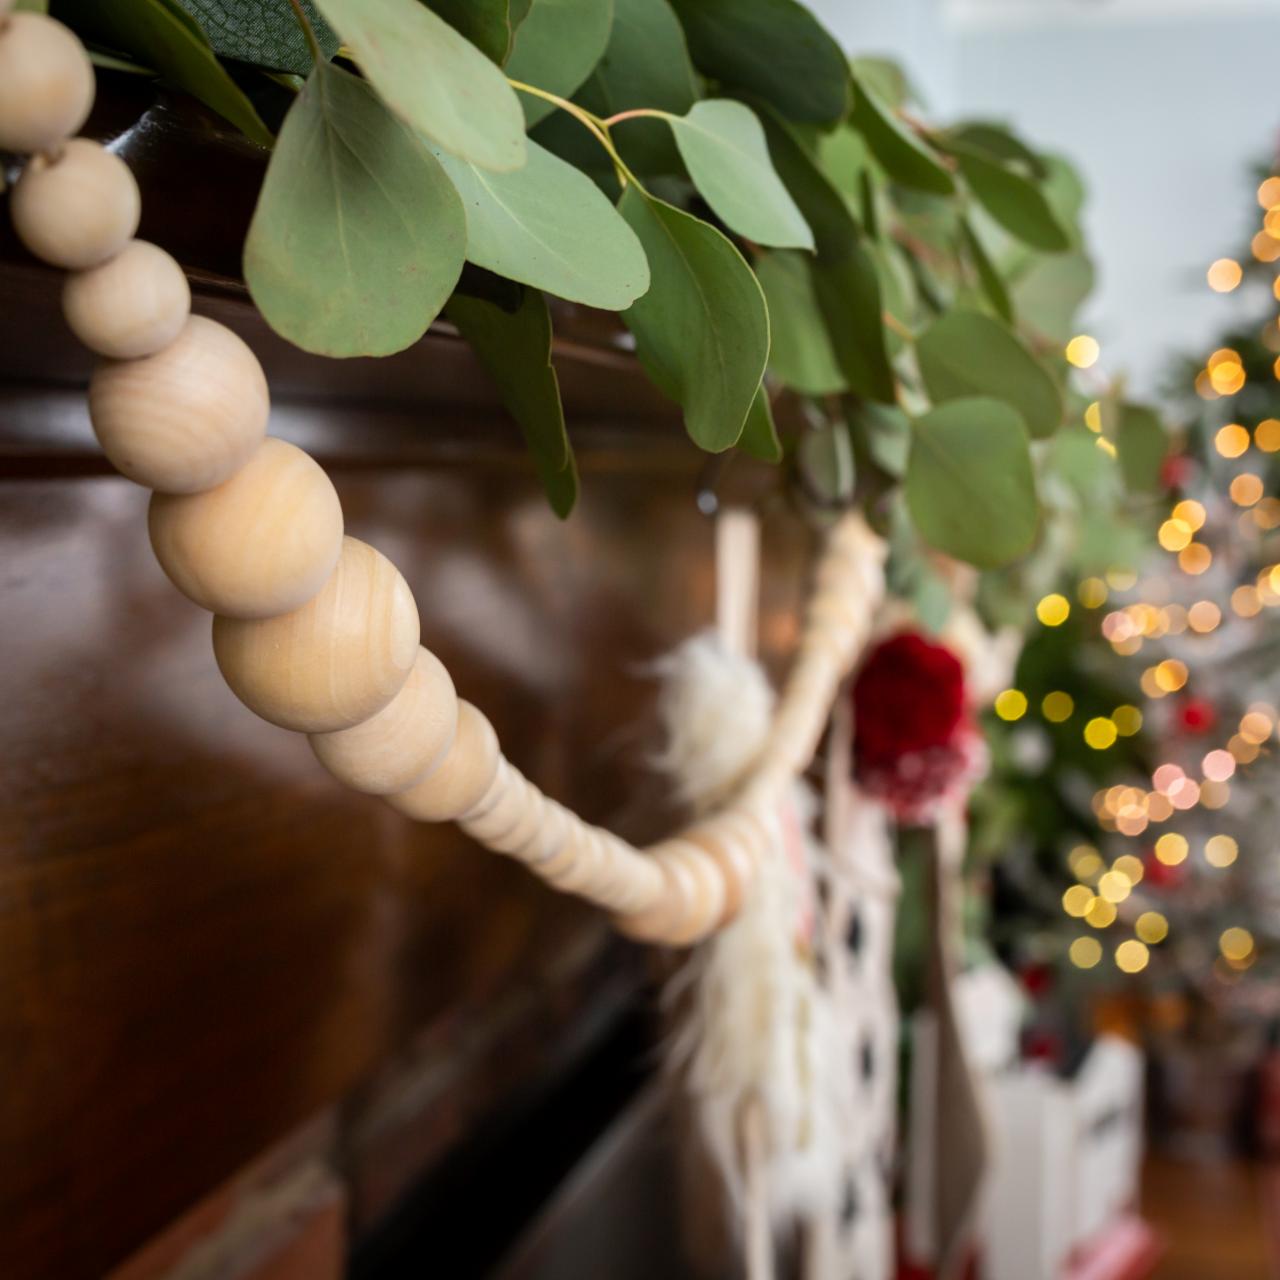 DIY Christmas Decor With Wooden Craft Beads